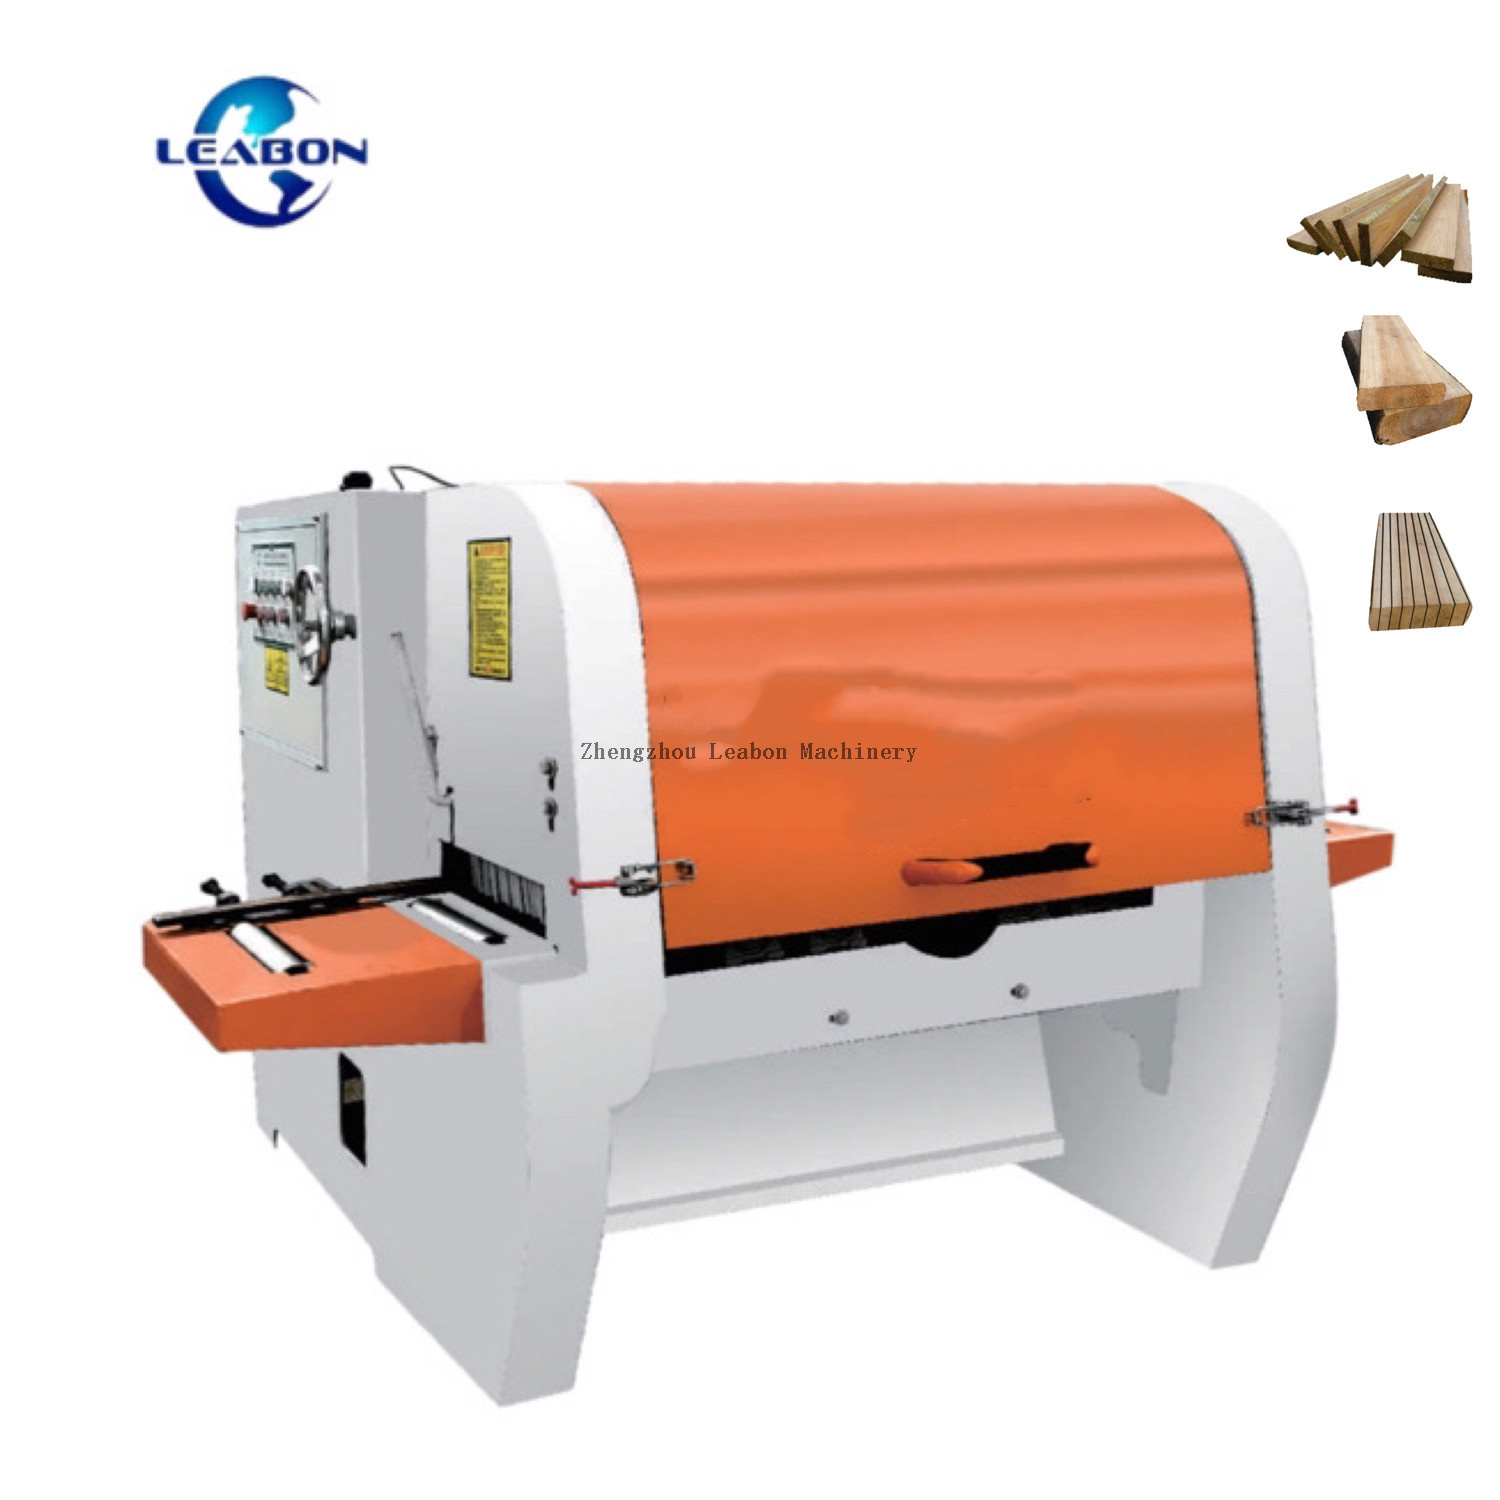 Light Double-axis Square Wood Multi Rip Saw